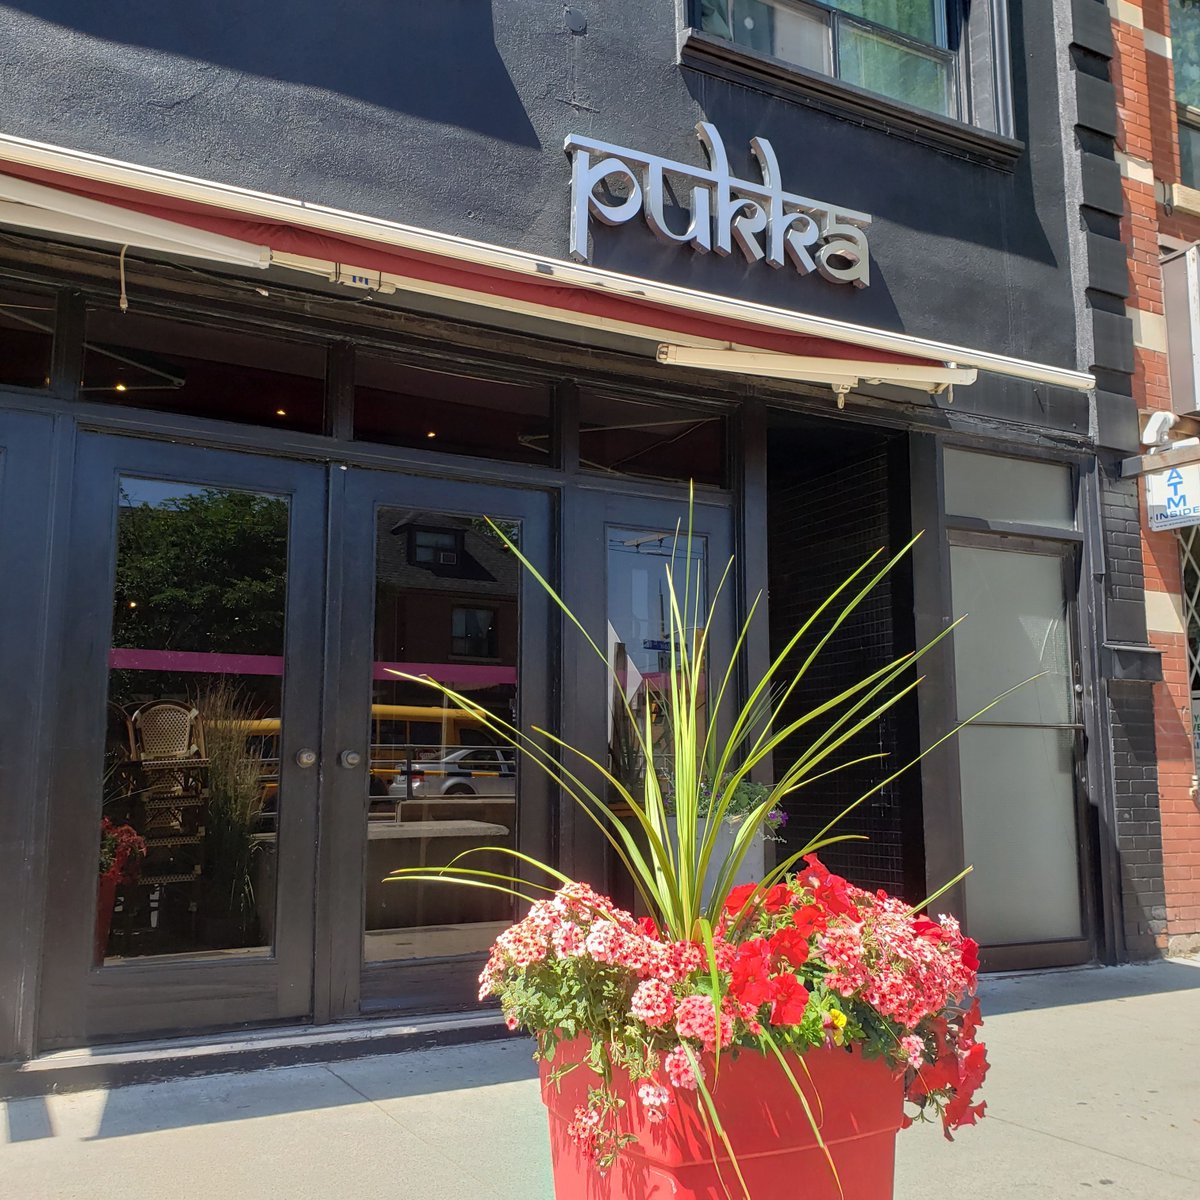 Patio COMING SOON! 💃 🕺 🥳 

We can't wait to serve you on our extended patio this summer - updates to follow!!

#stclairwest #indianrestaurant #torontoeats #torontorestaurants #toeats #torontolife #midtowntoronto #hillcrestvillage #foresthilltoronto